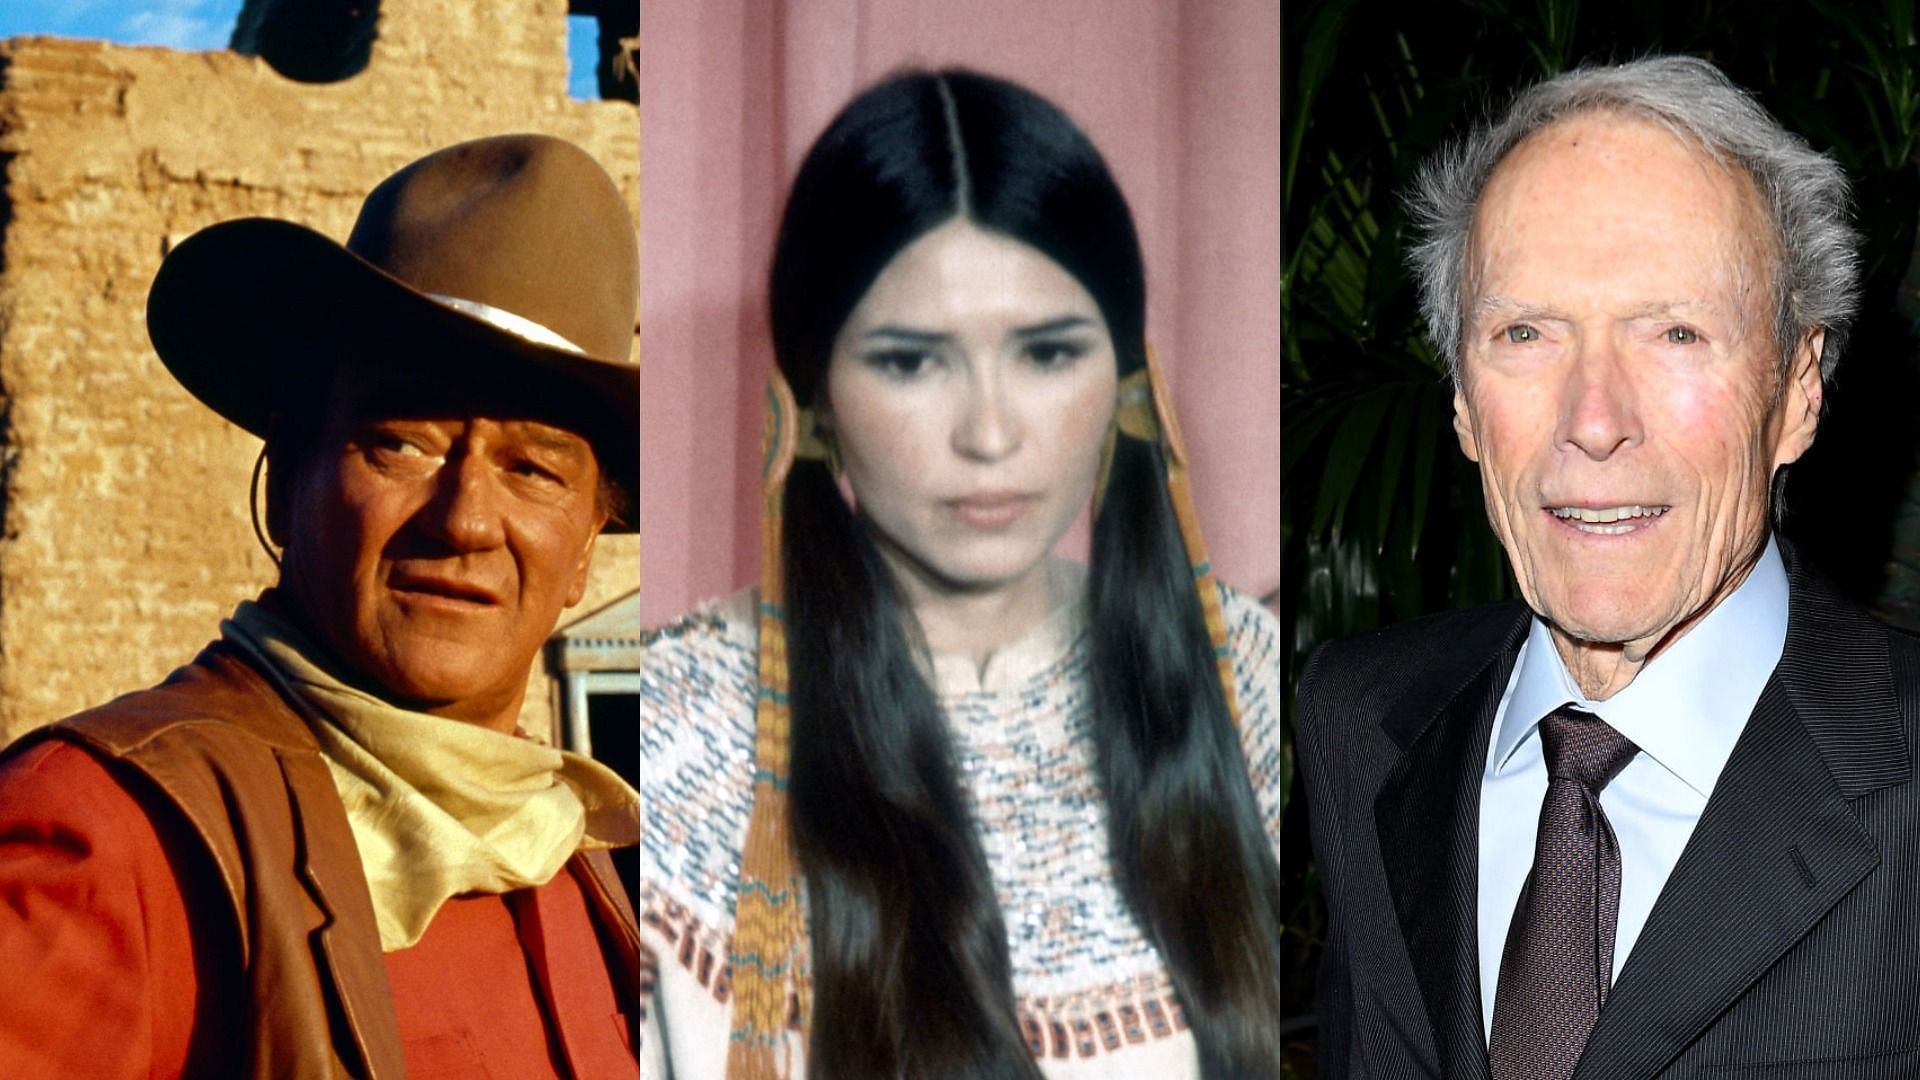 Sacheen Littlefeather (center) was mocked by Clint Eastwood (right) and about to be yanked offstage by John Wayne (left) at the 1973 Oscars (Image via Getty Images)